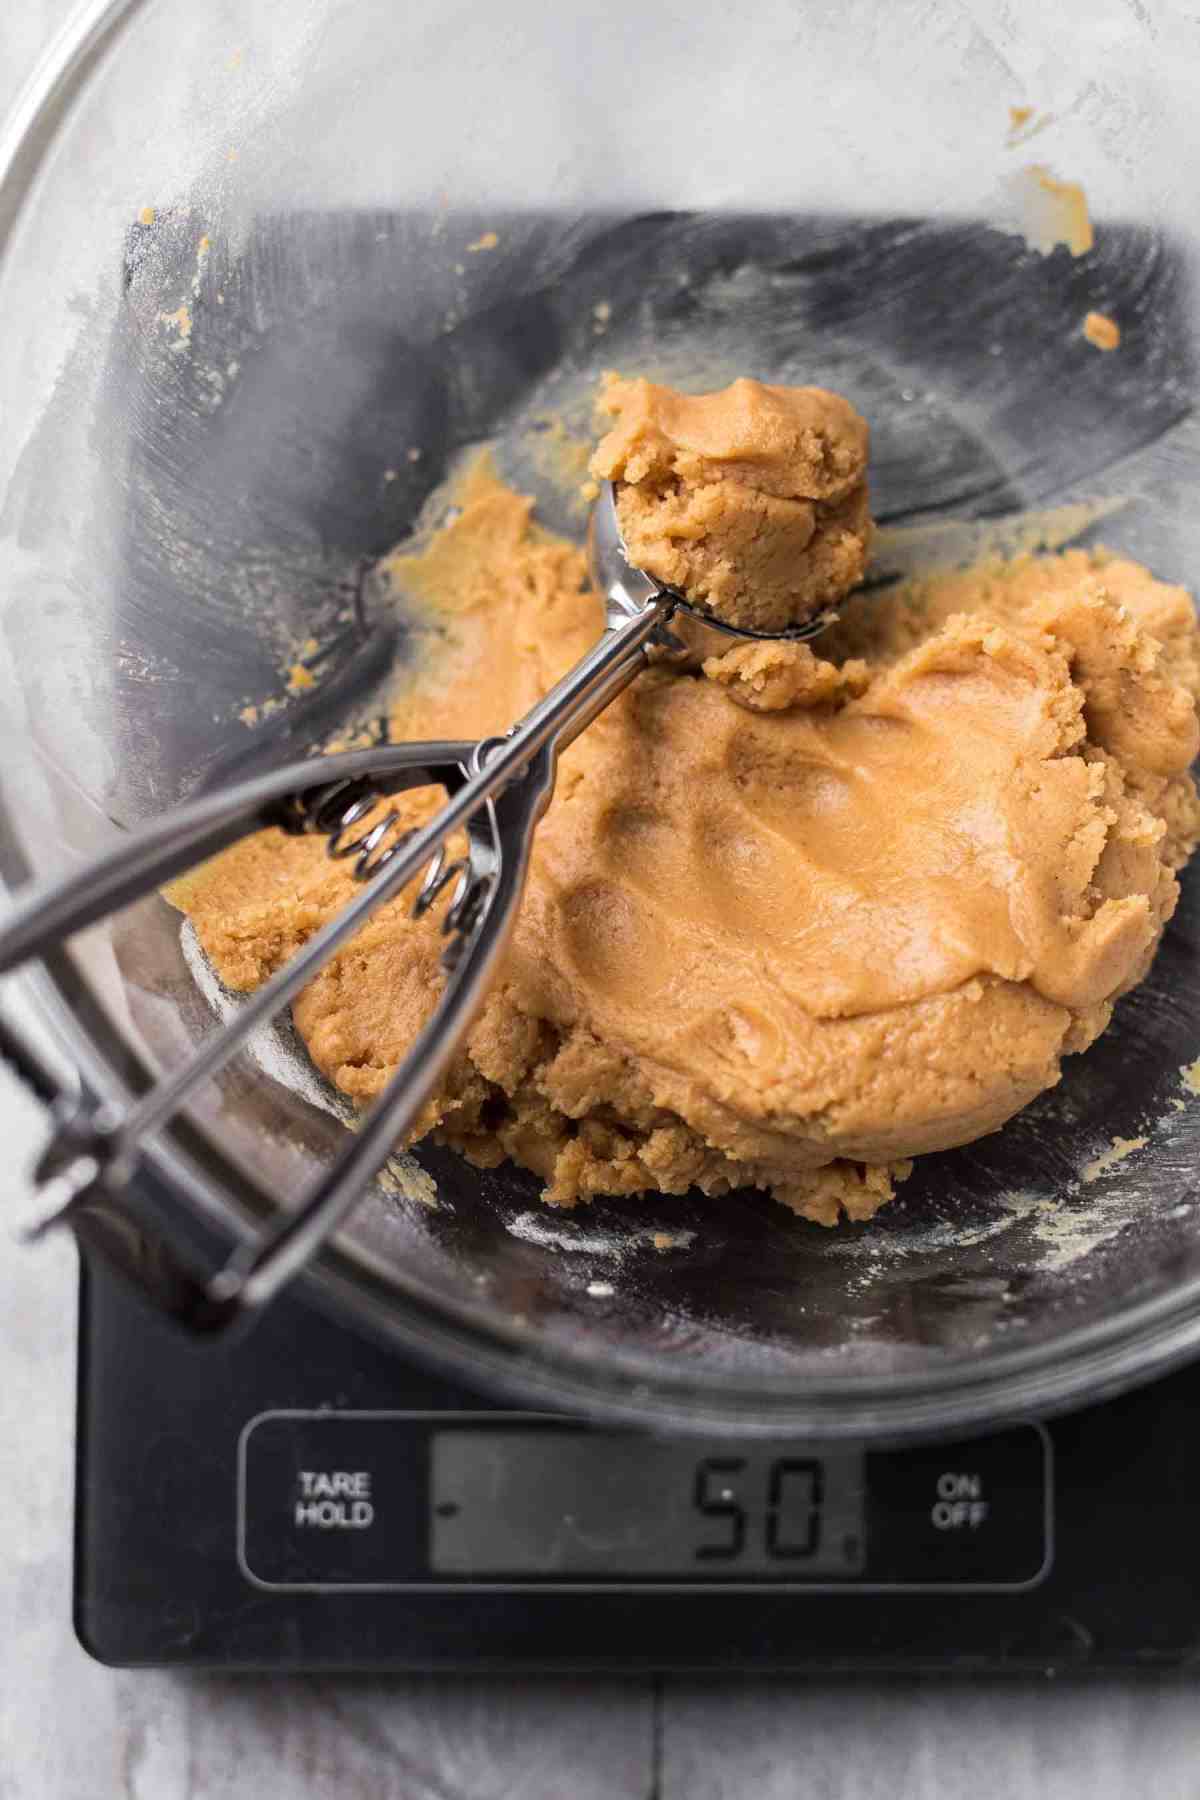 Peanut Butter Cookie dough in bowl on kitchen scale